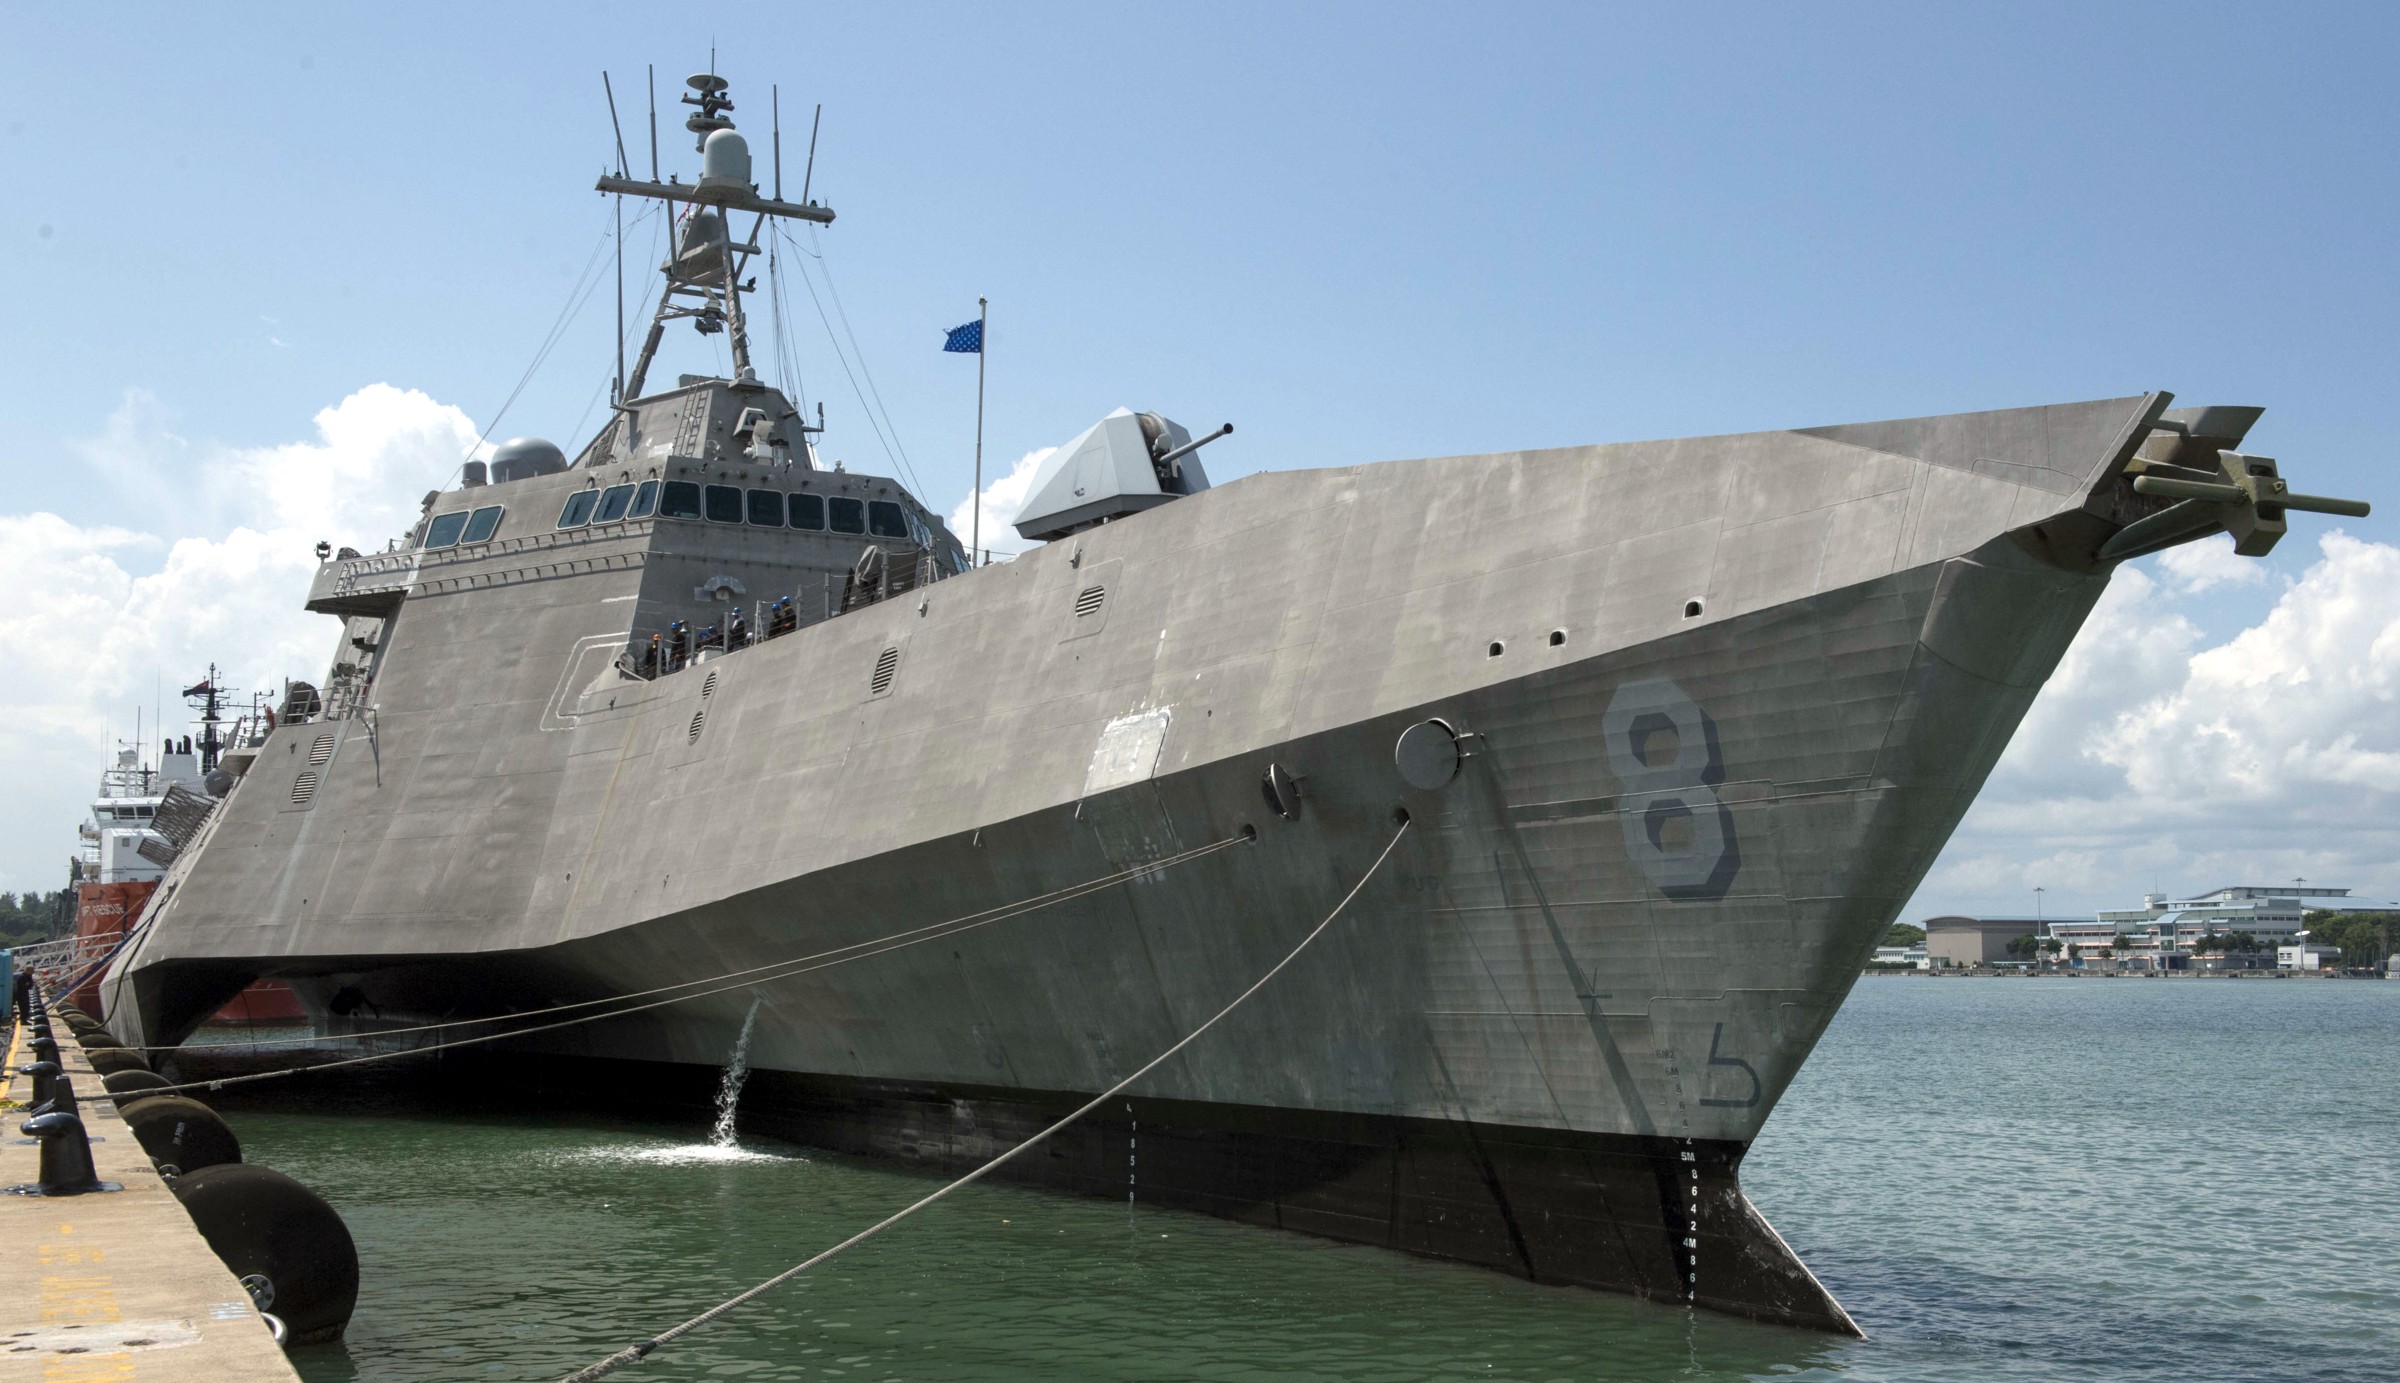 lcs-8 uss montgomery independence class littoral combat ship us navy 40 changi naval base singapore